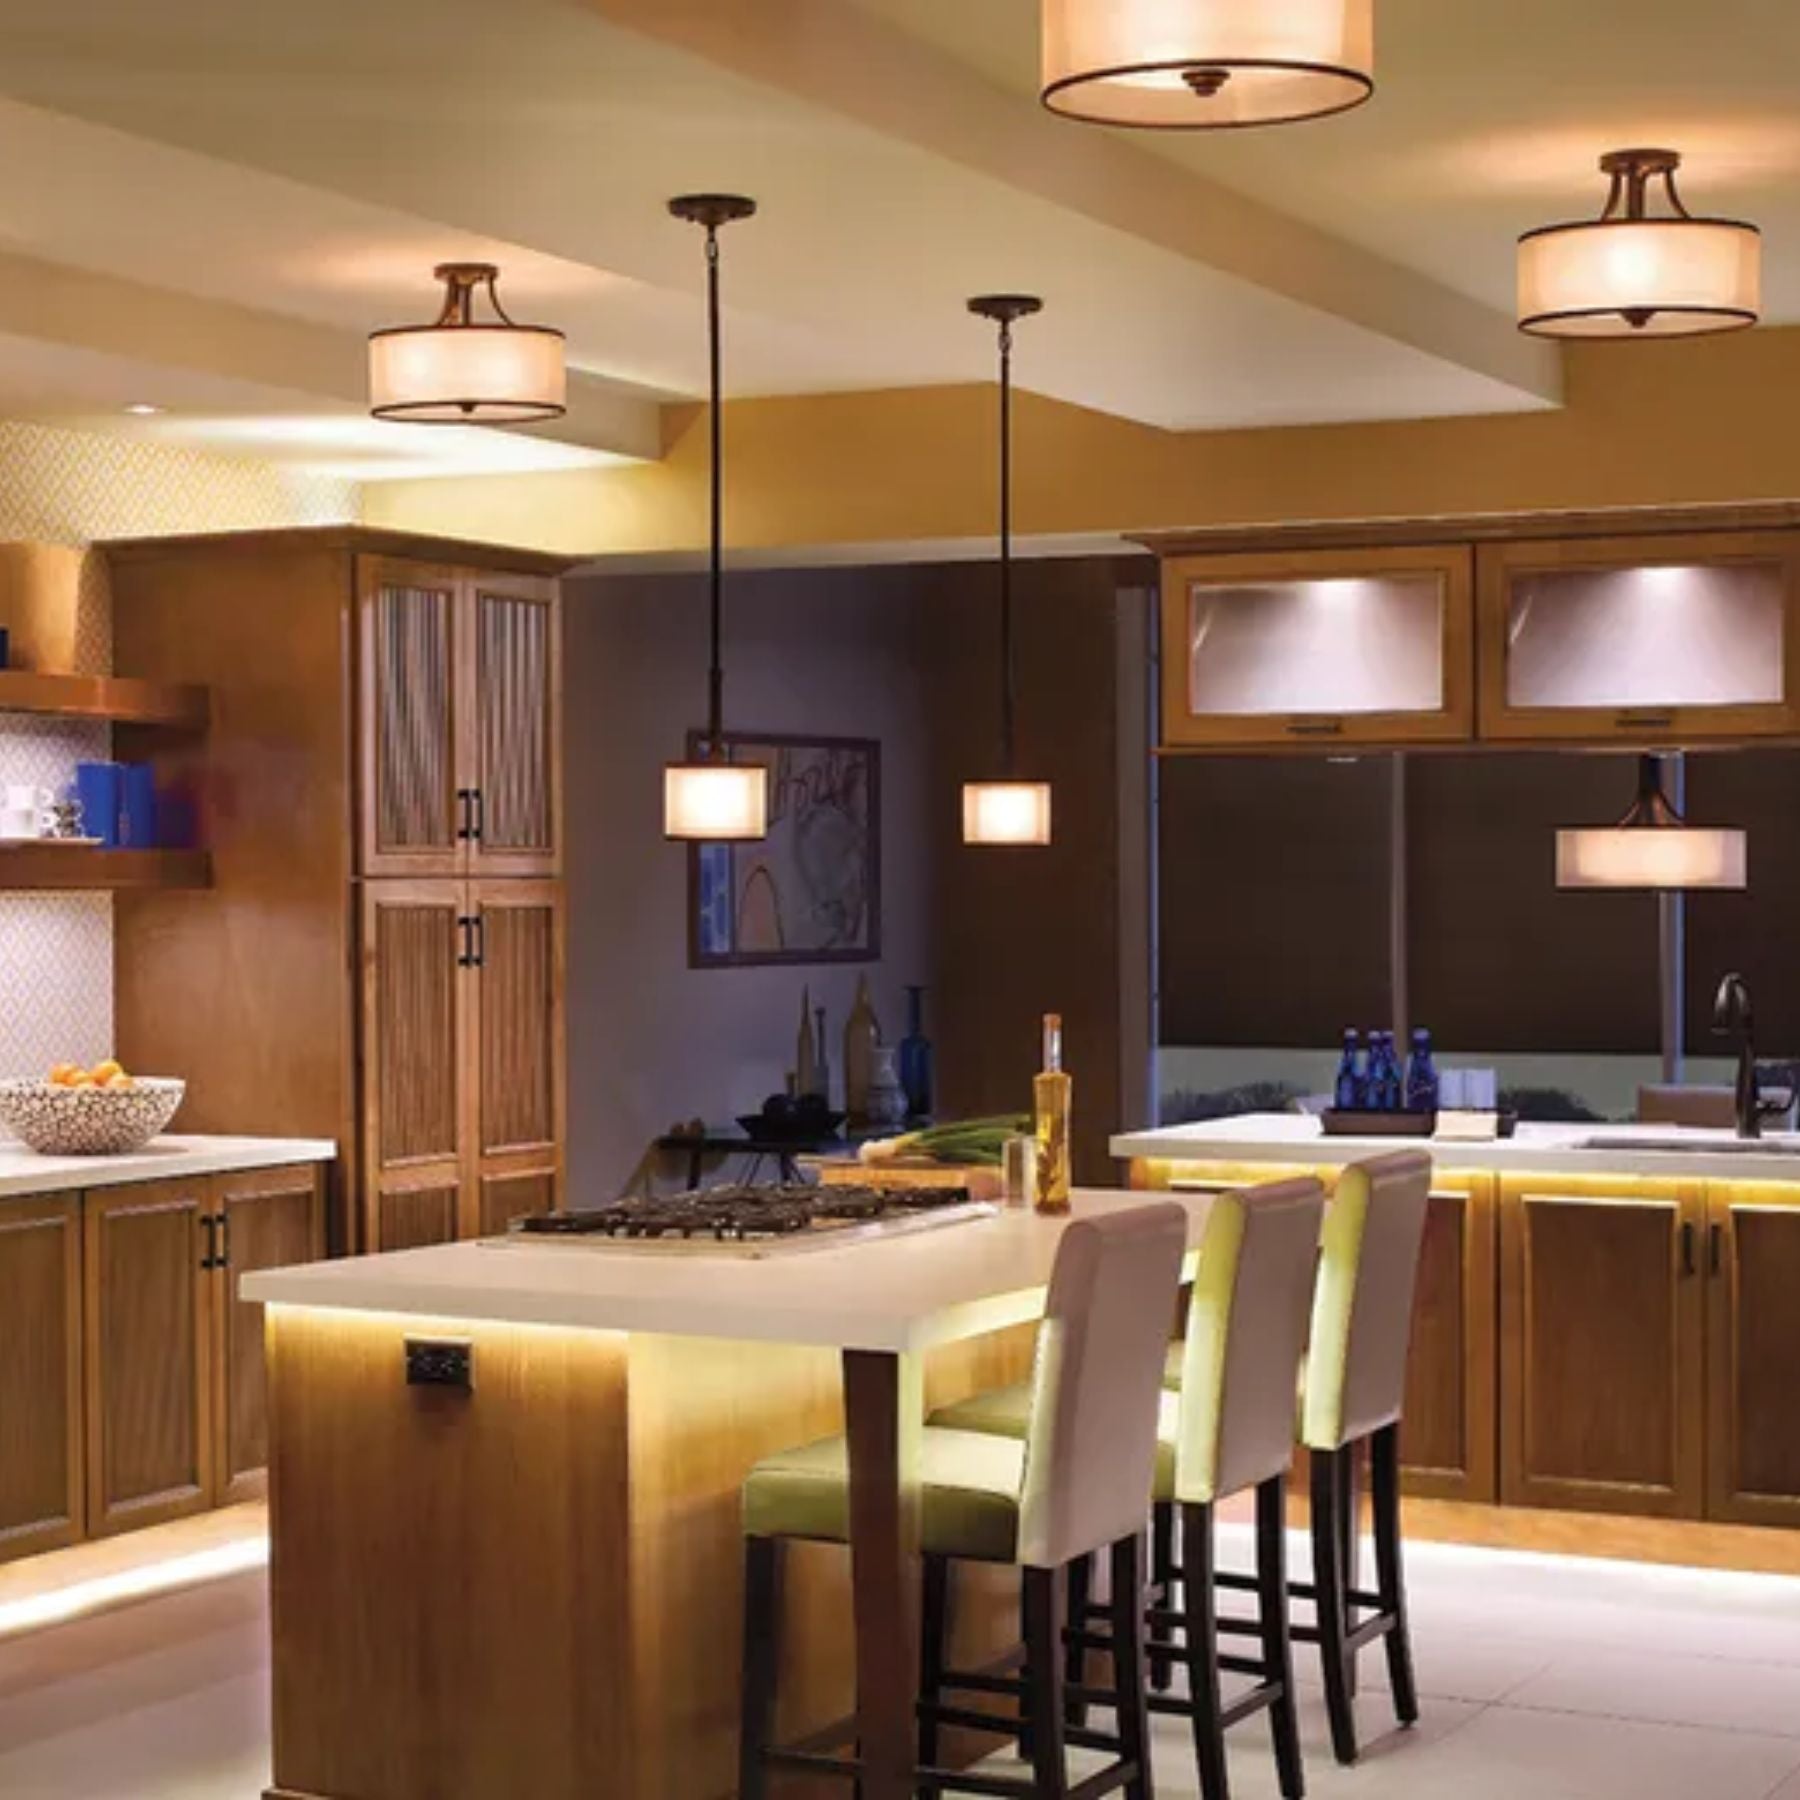 layered lighting in interior design helps create visual appeal